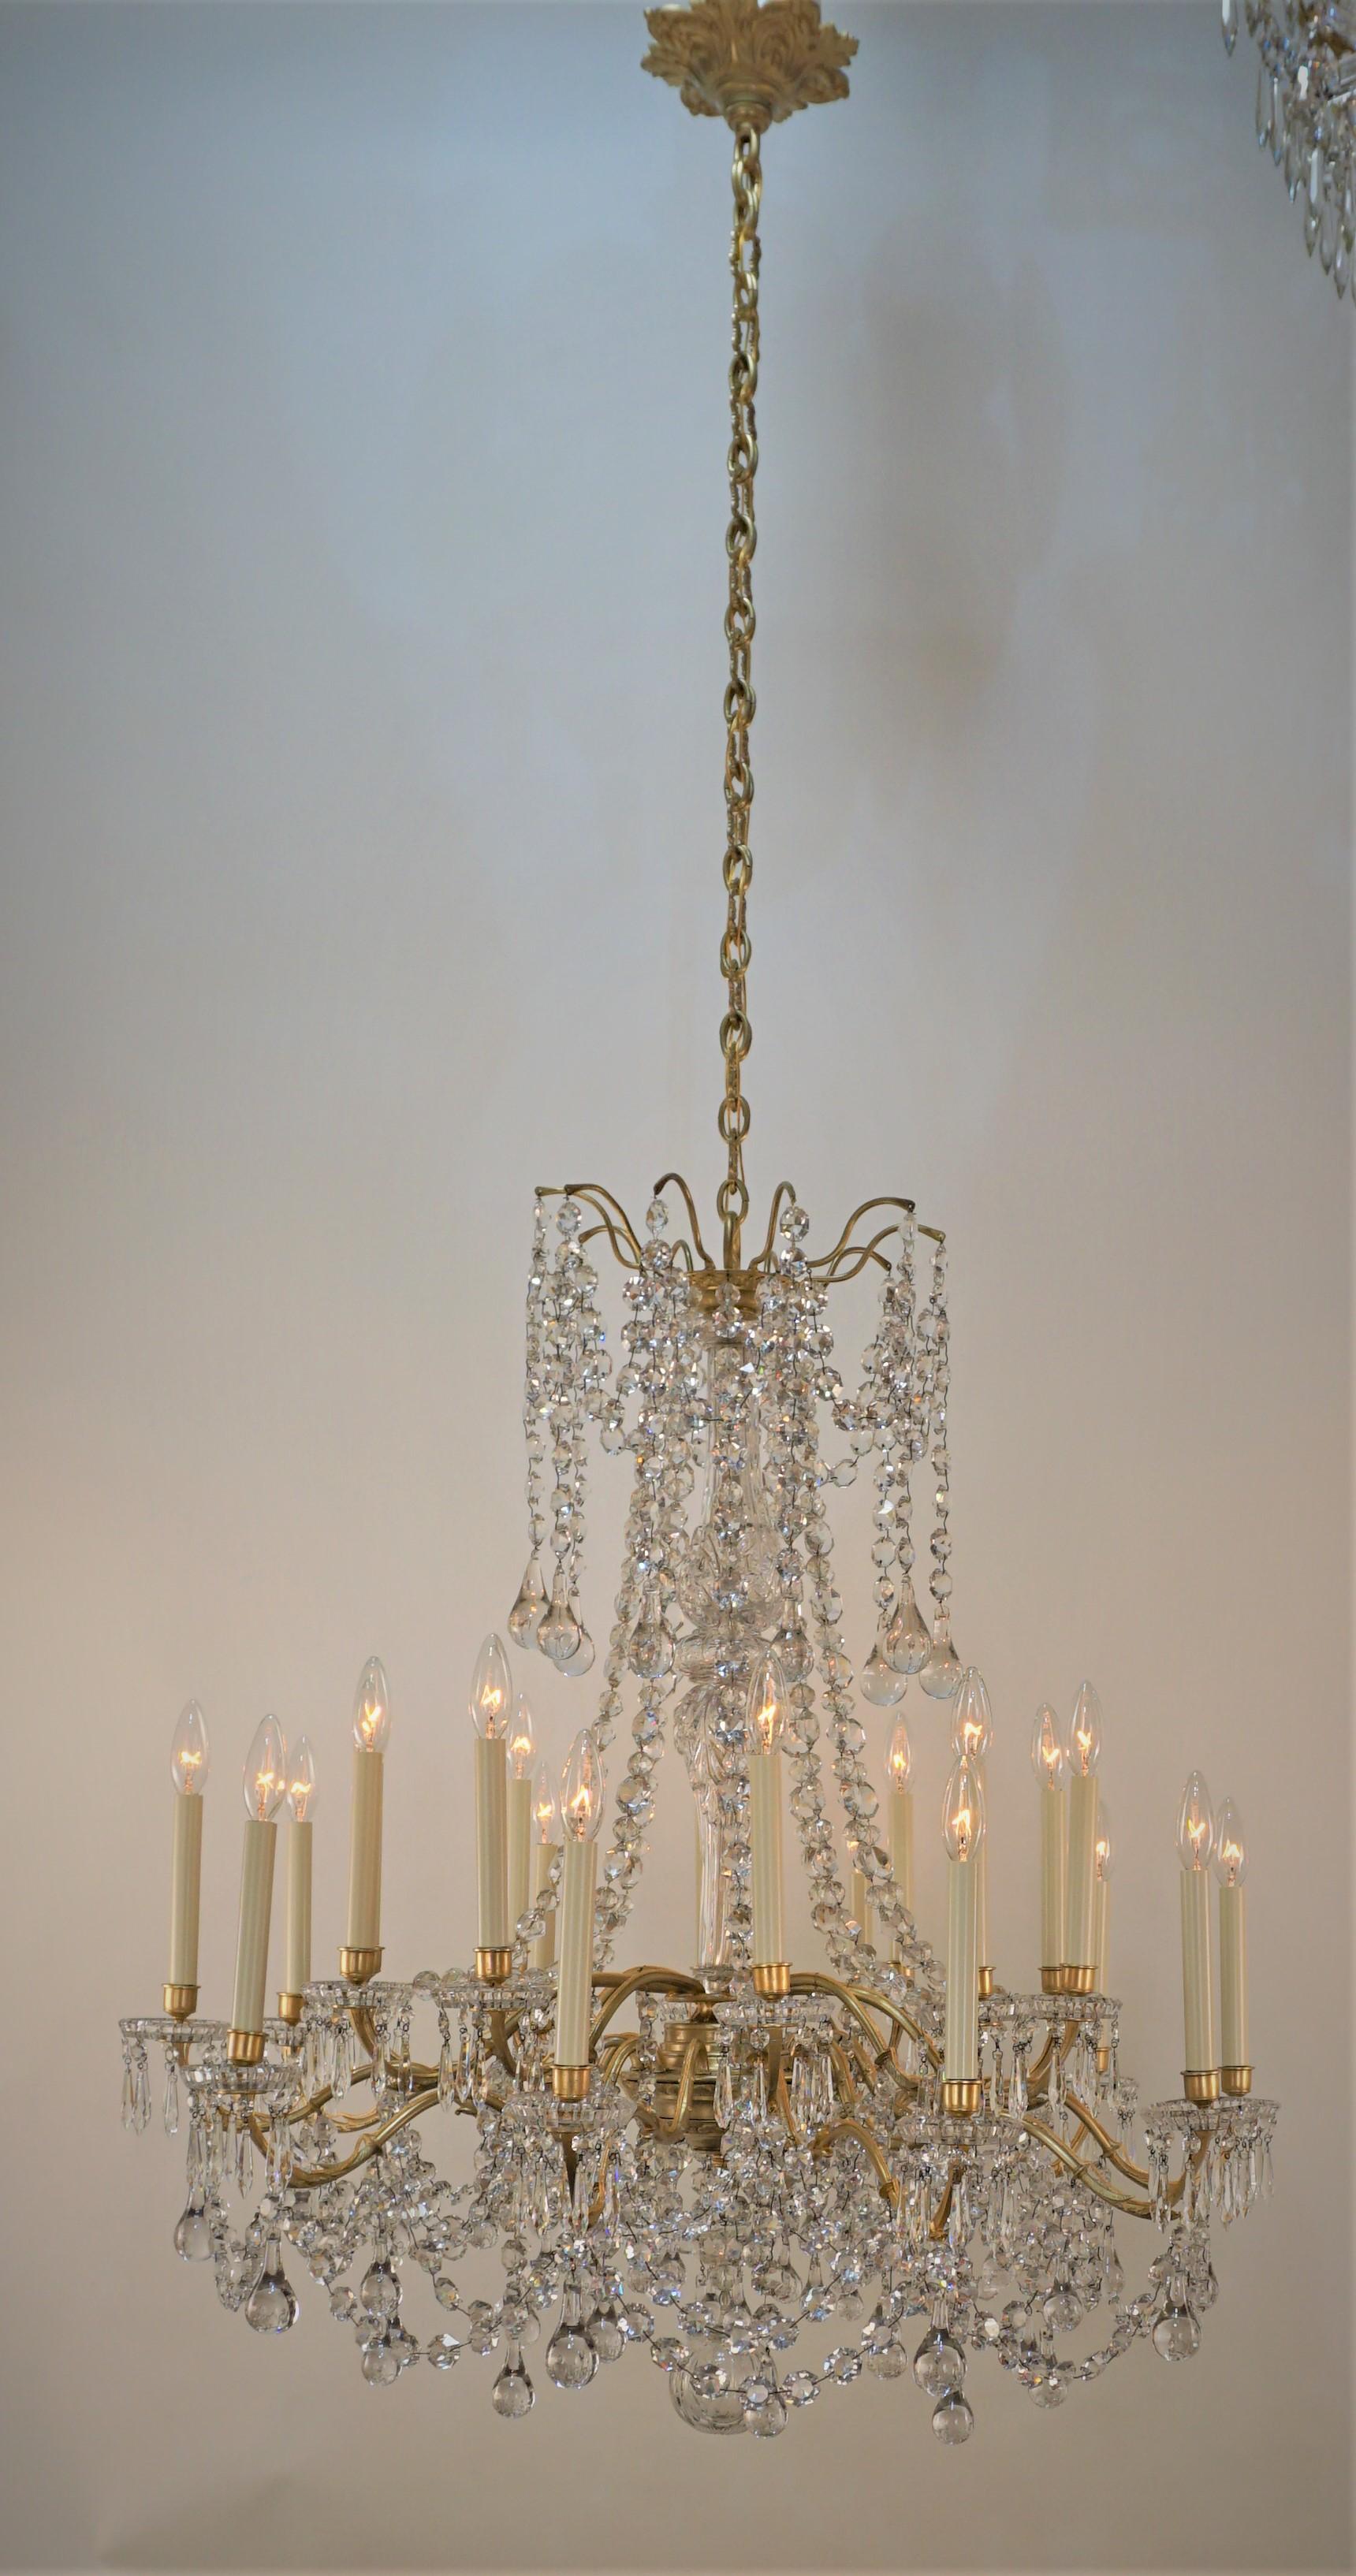 Elegant twenty lights signed Baccarat crystal and bronze chandelier.
Professionally rewired and ready for installation.
Measurement: width 37